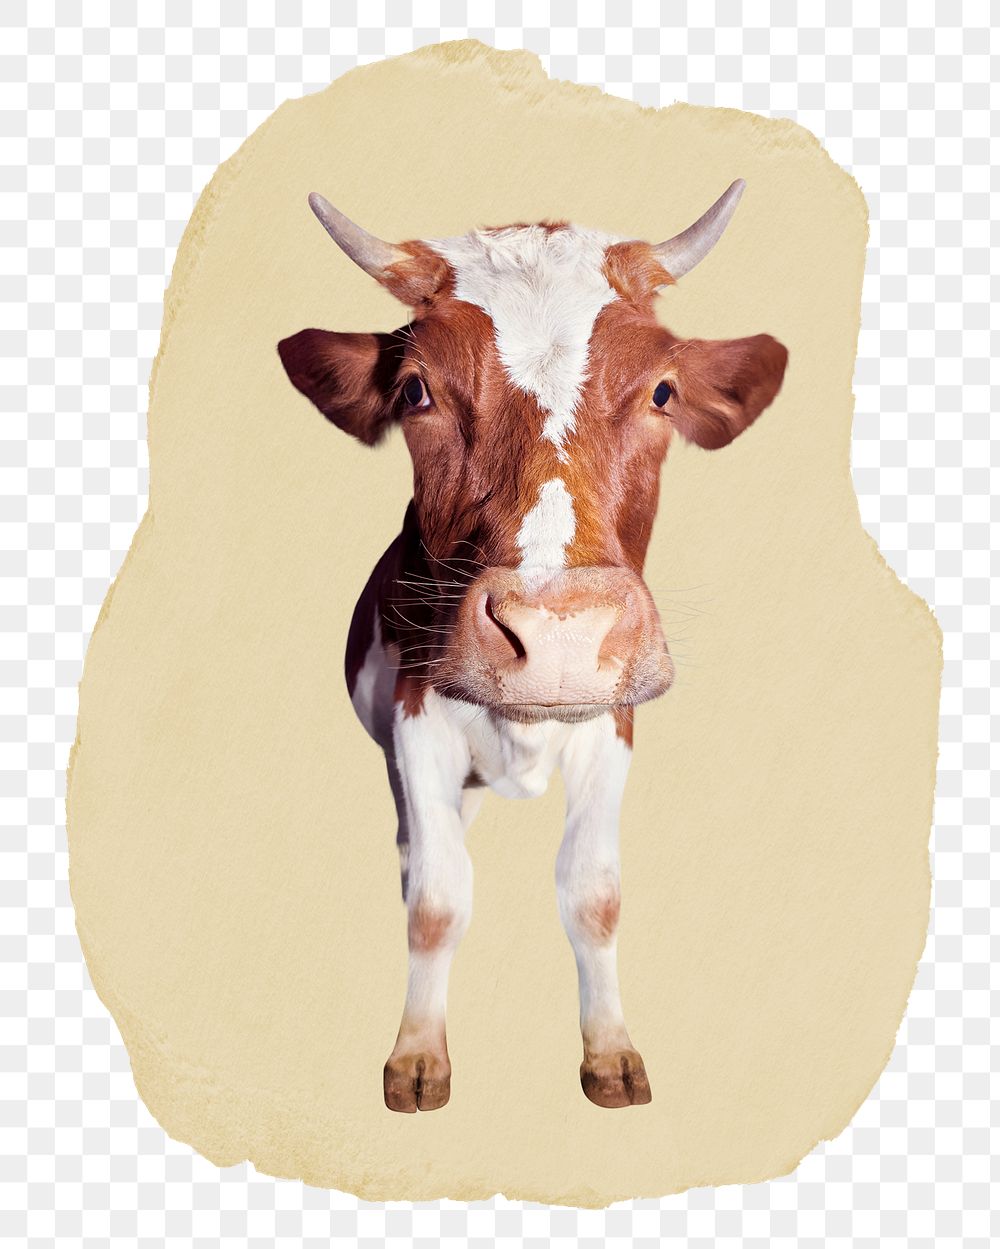 Guernsey cattle png sticker, ripped paper, transparent background